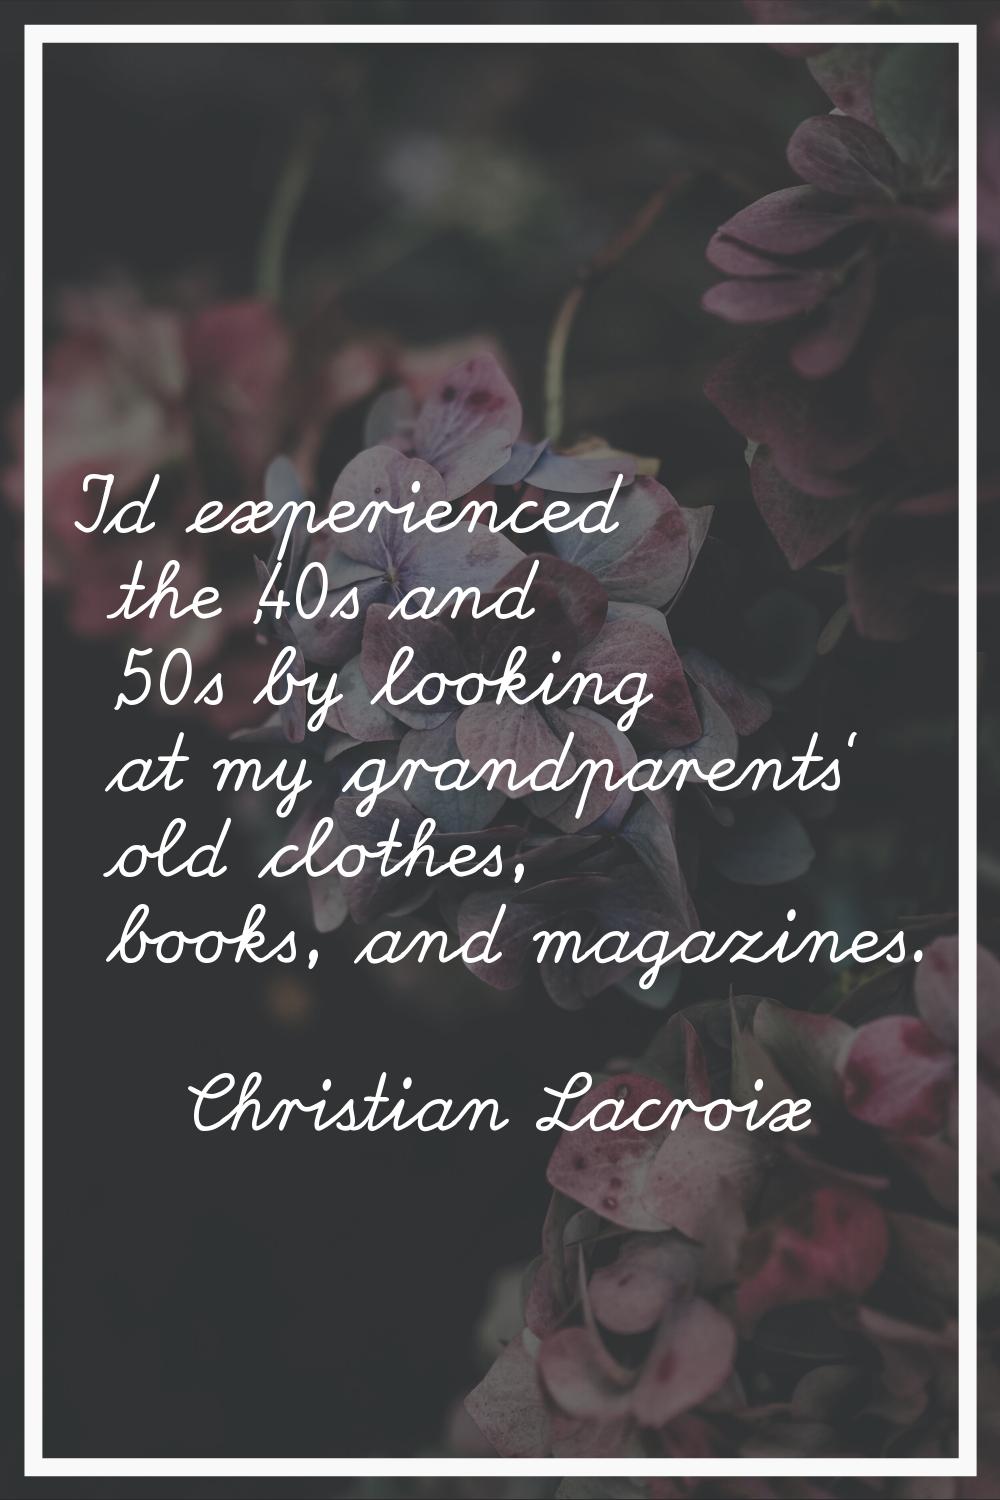 I'd experienced the '40s and '50s by looking at my grandparents' old clothes, books, and magazines.